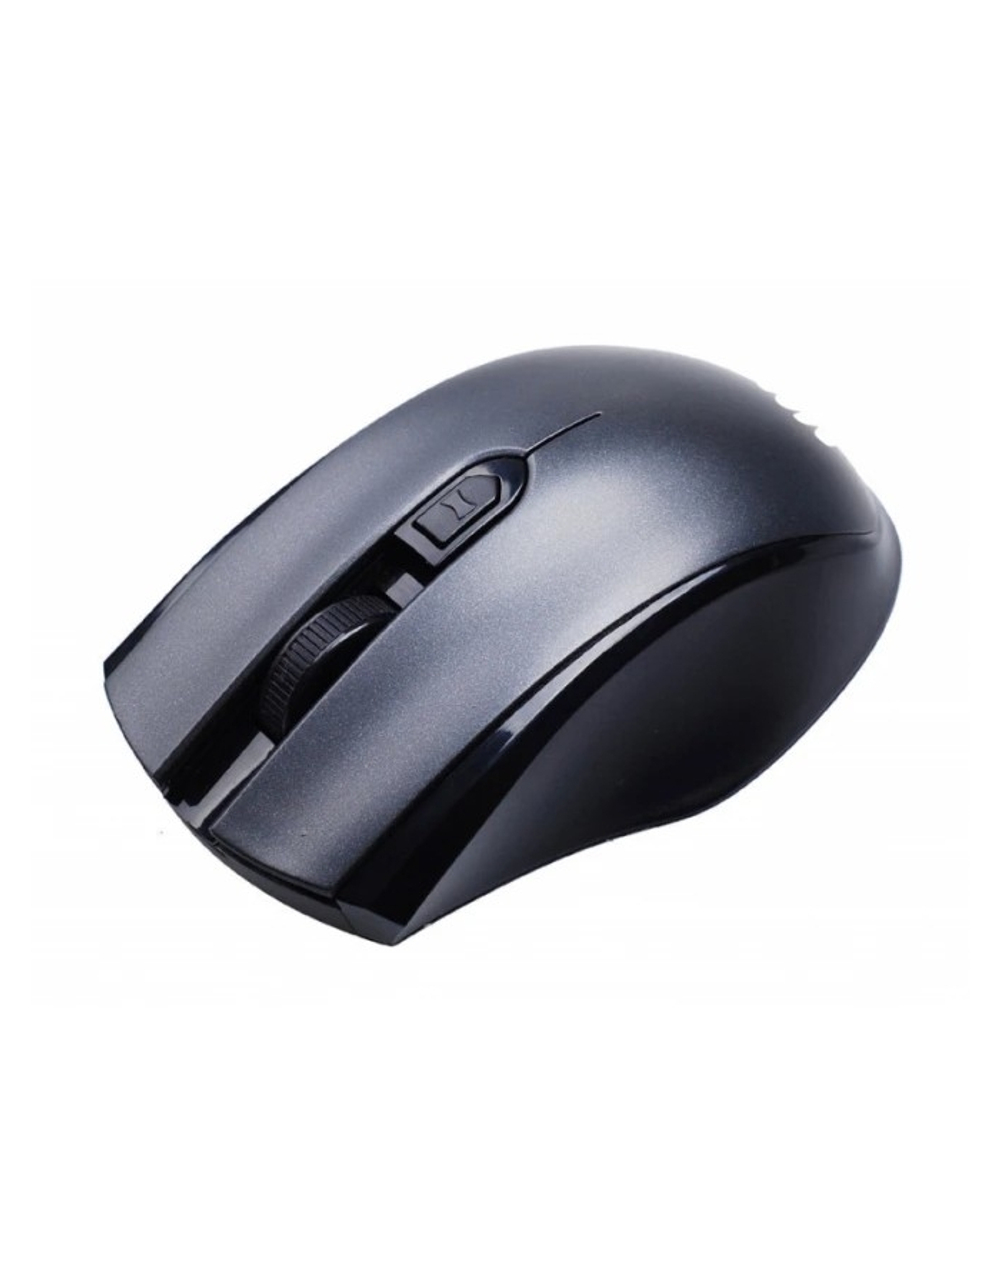 Acer OMR030 [ZL.MCEEE.007] Mouse wireless USB (3but) black